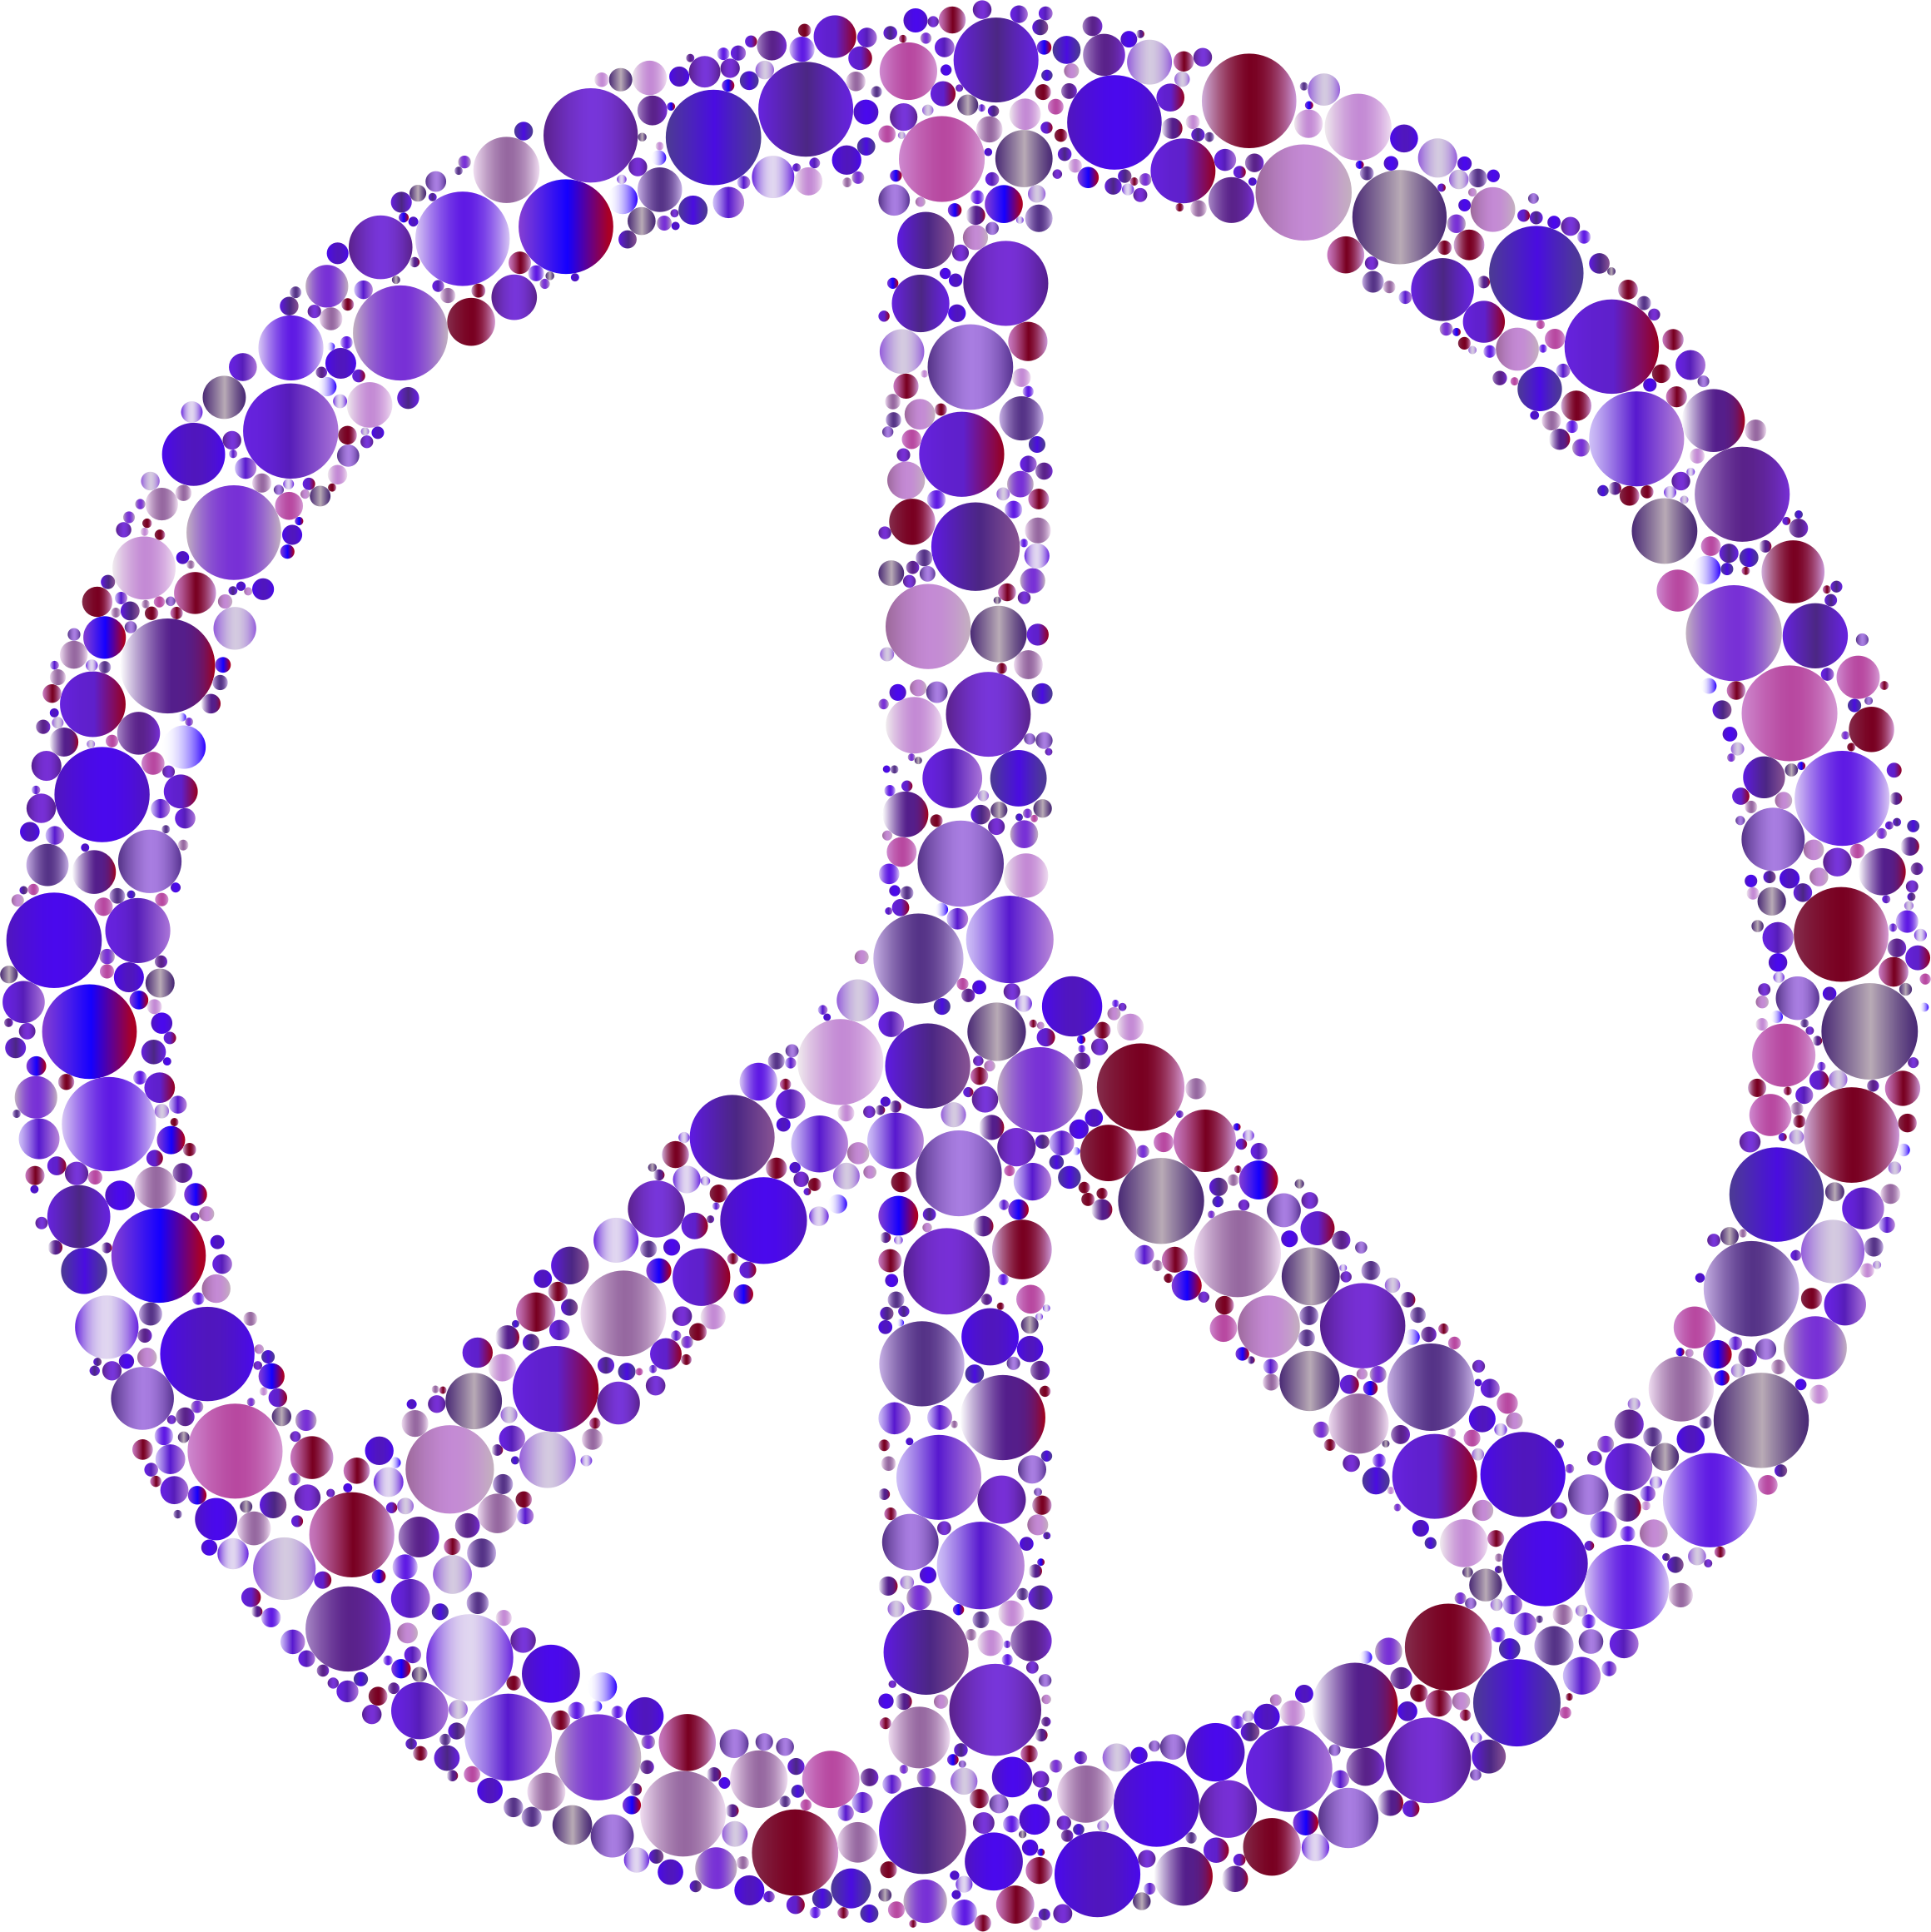 Colorful Circles Peace Sign 10 By Gdj